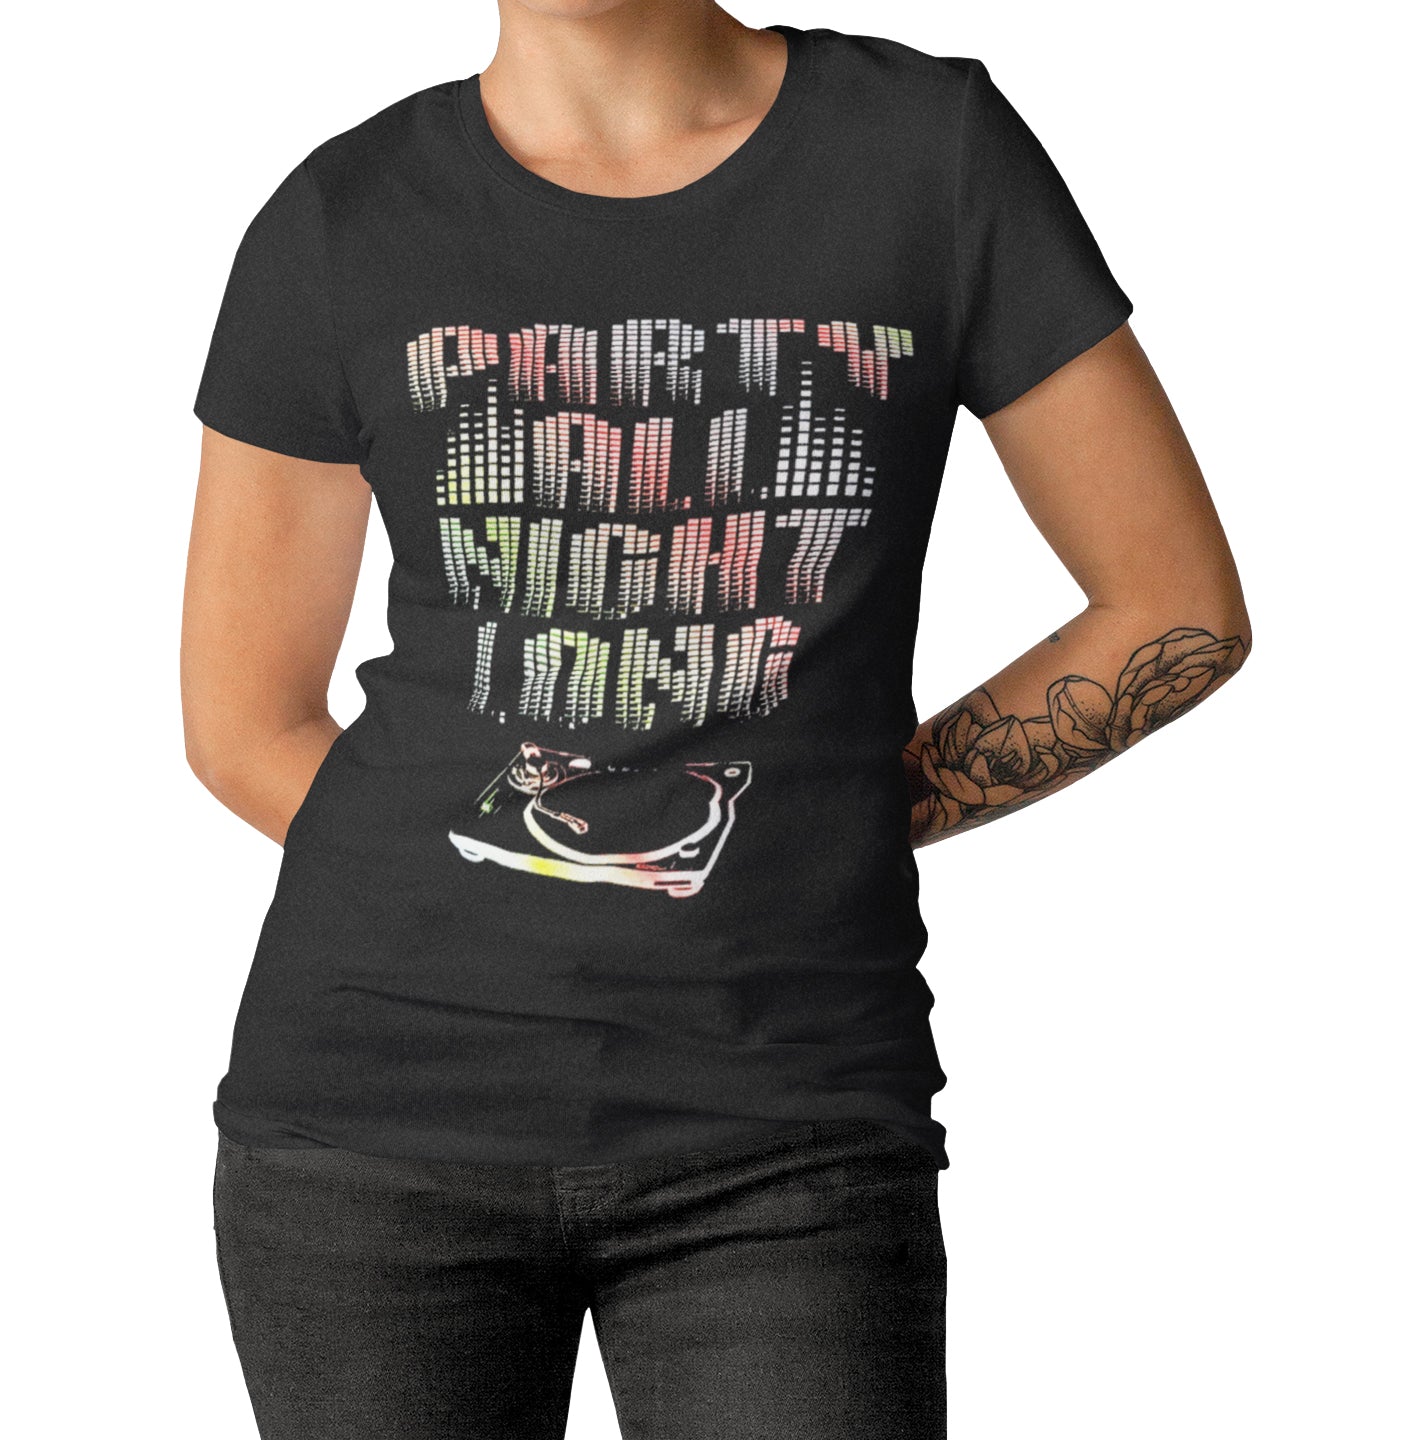 Party All Night Long (Neon Print)